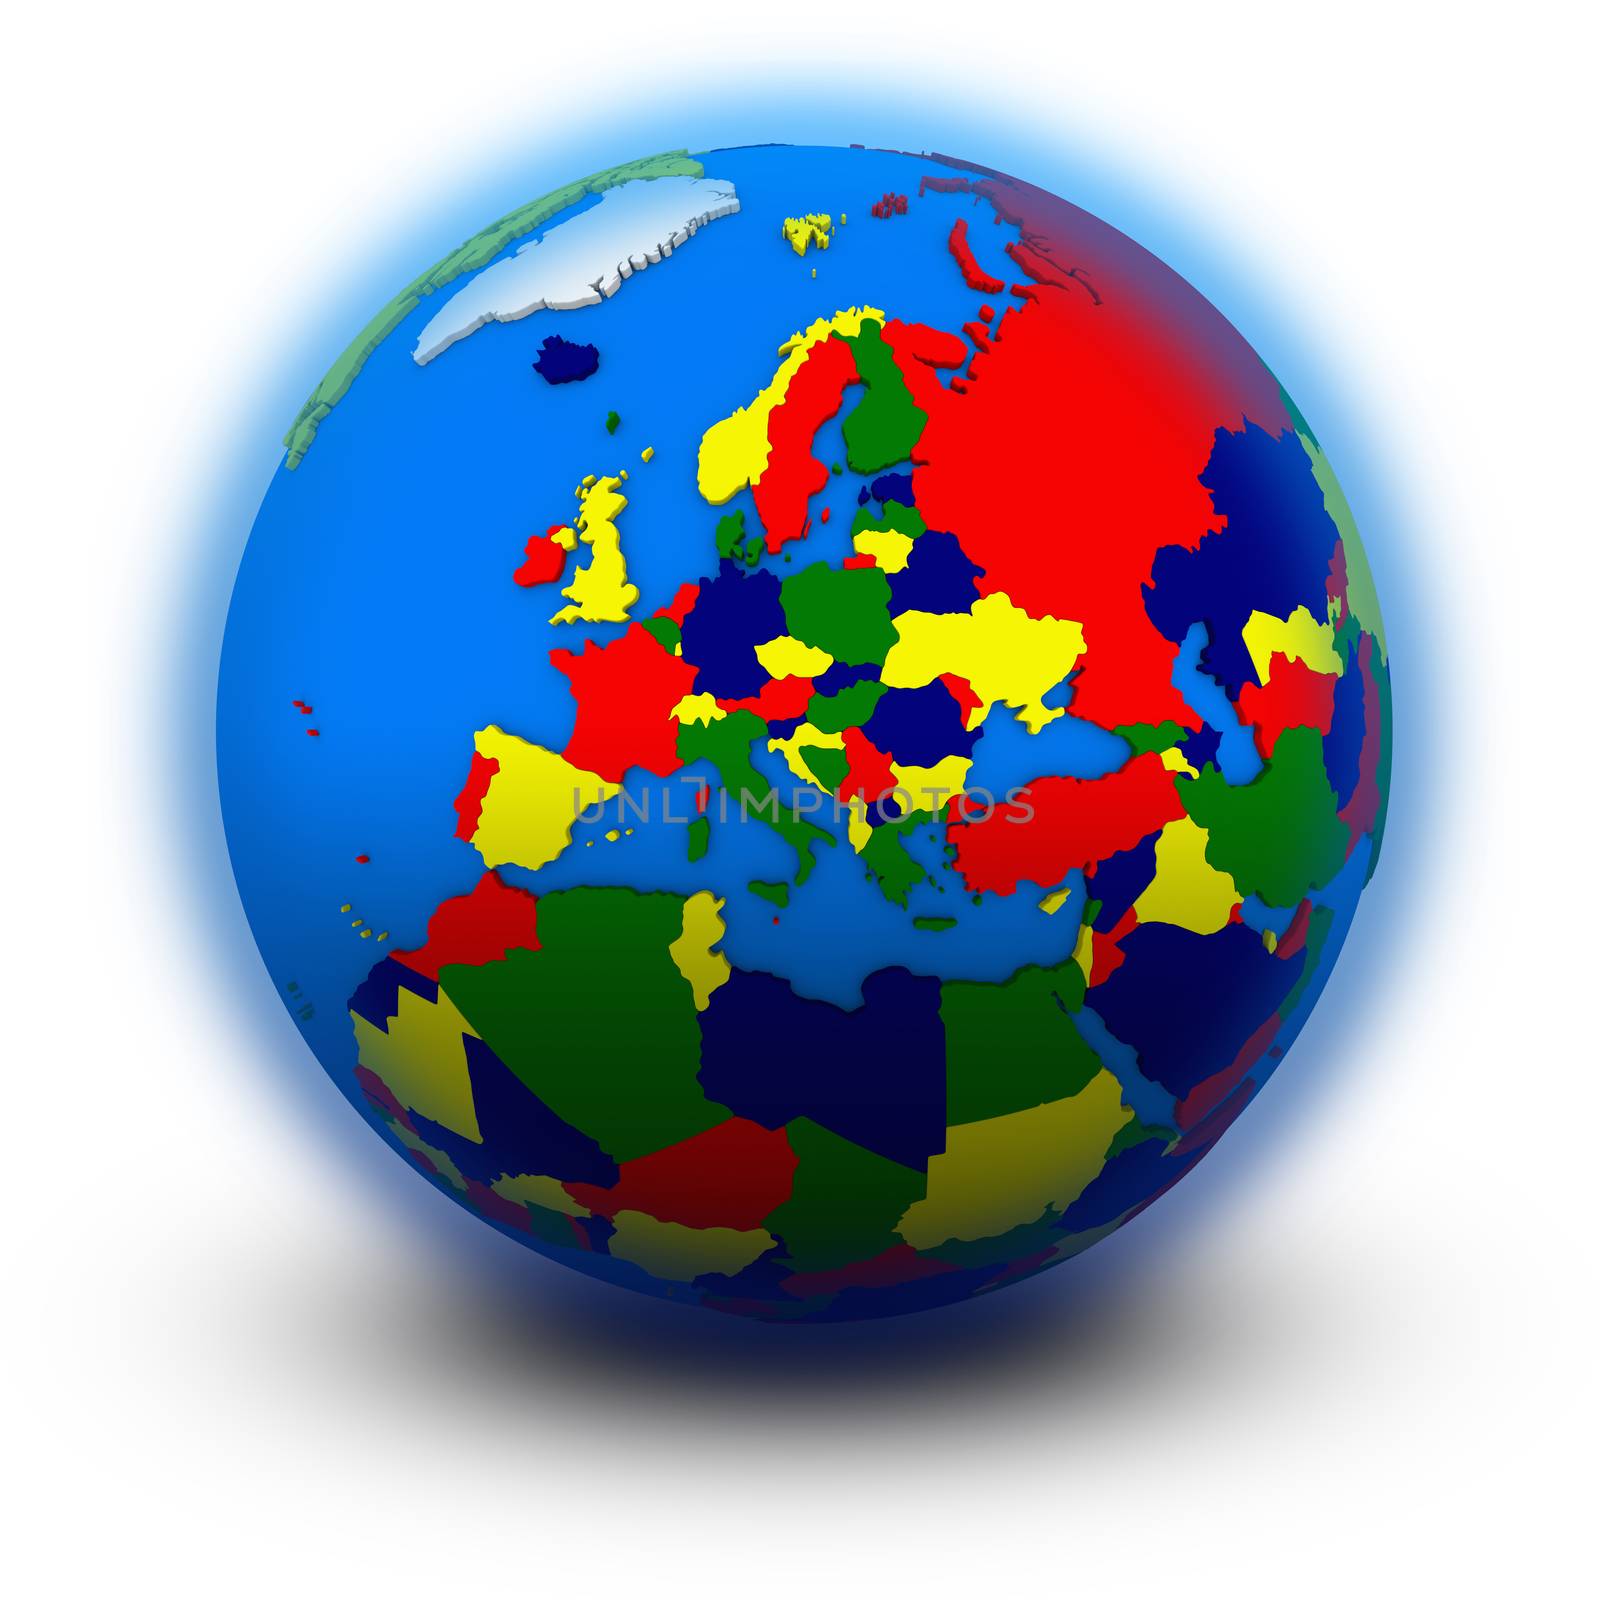 Europe on political globe by Harvepino